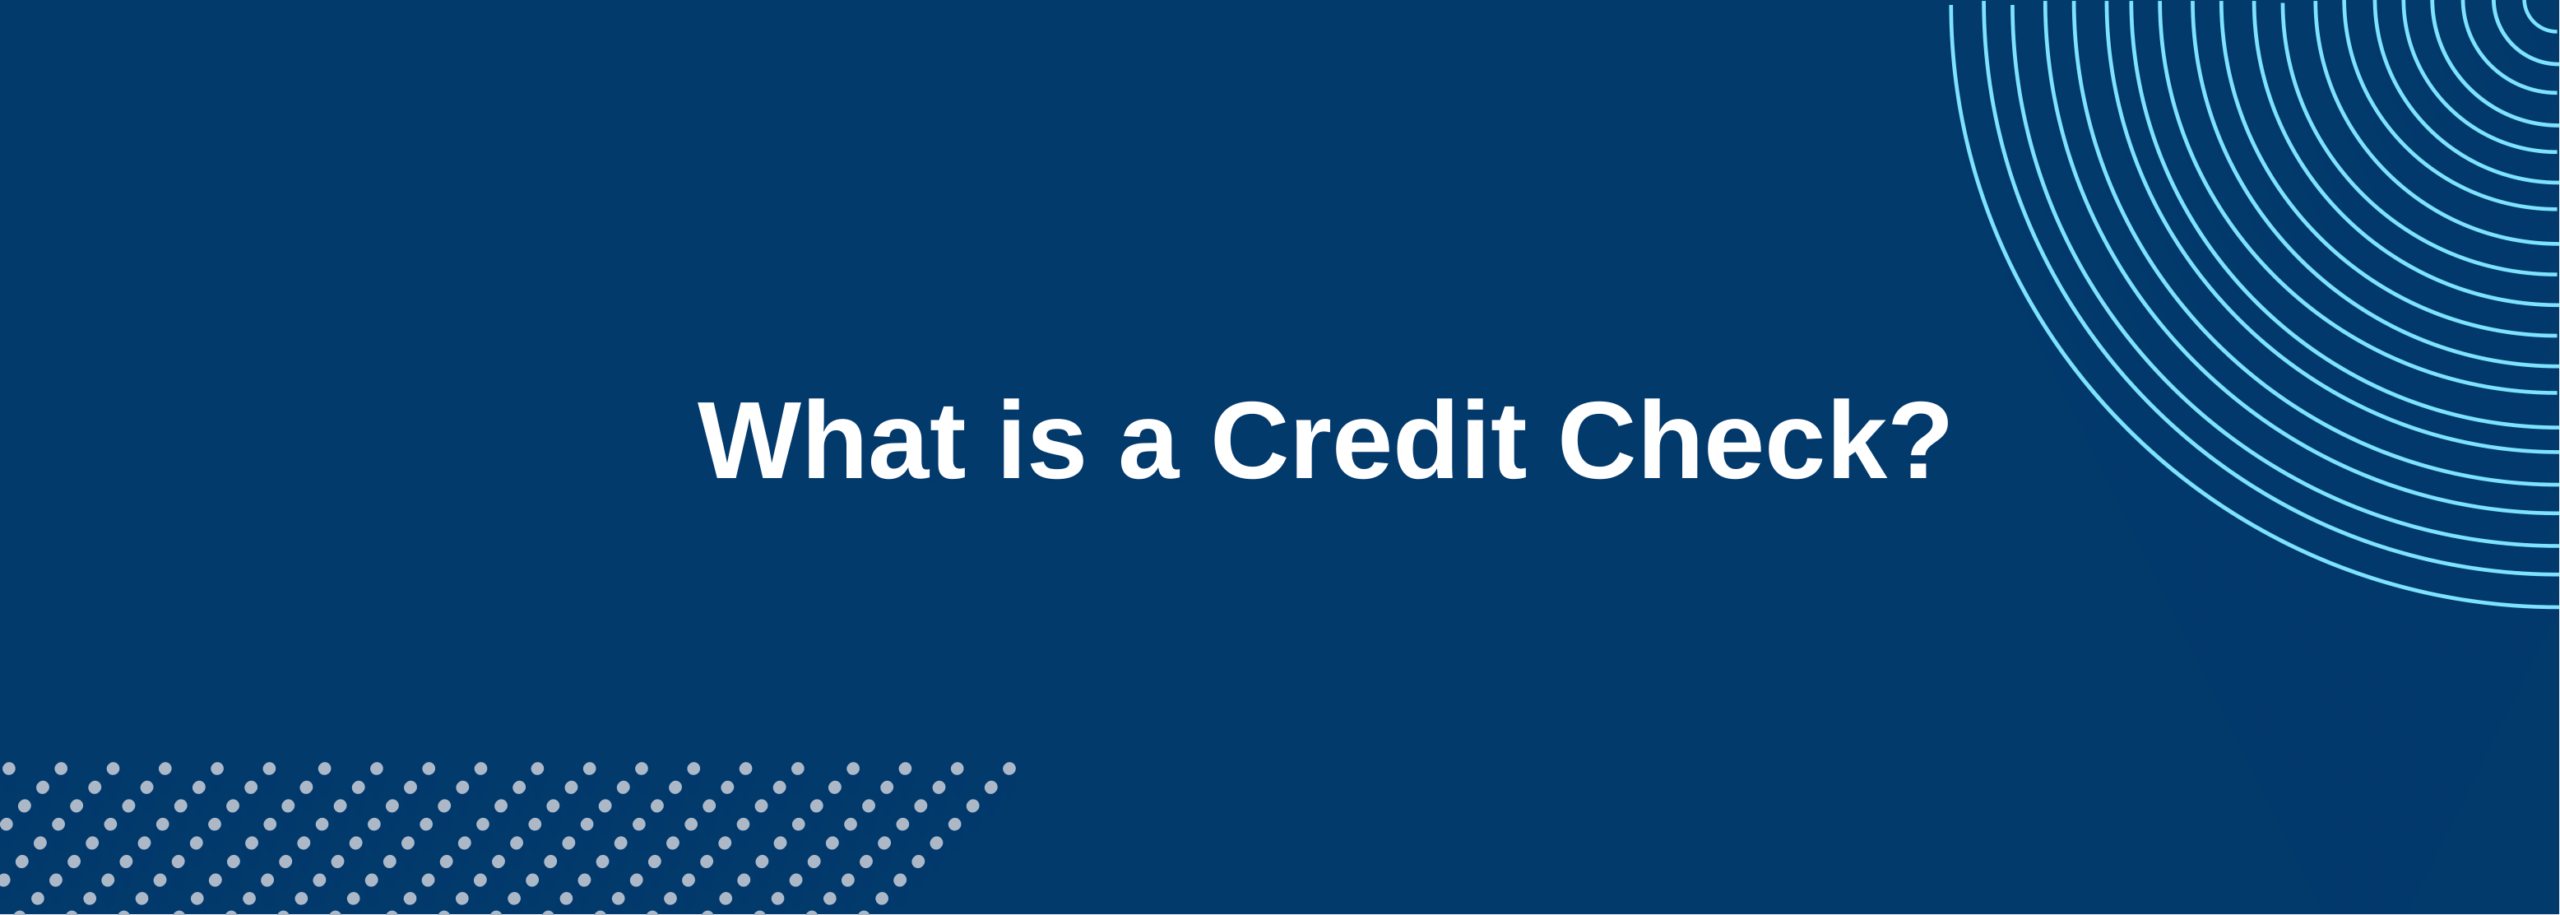 A credit check is a summary of a consumer’s existing and past credit, payment habits, and types of loans taken out.